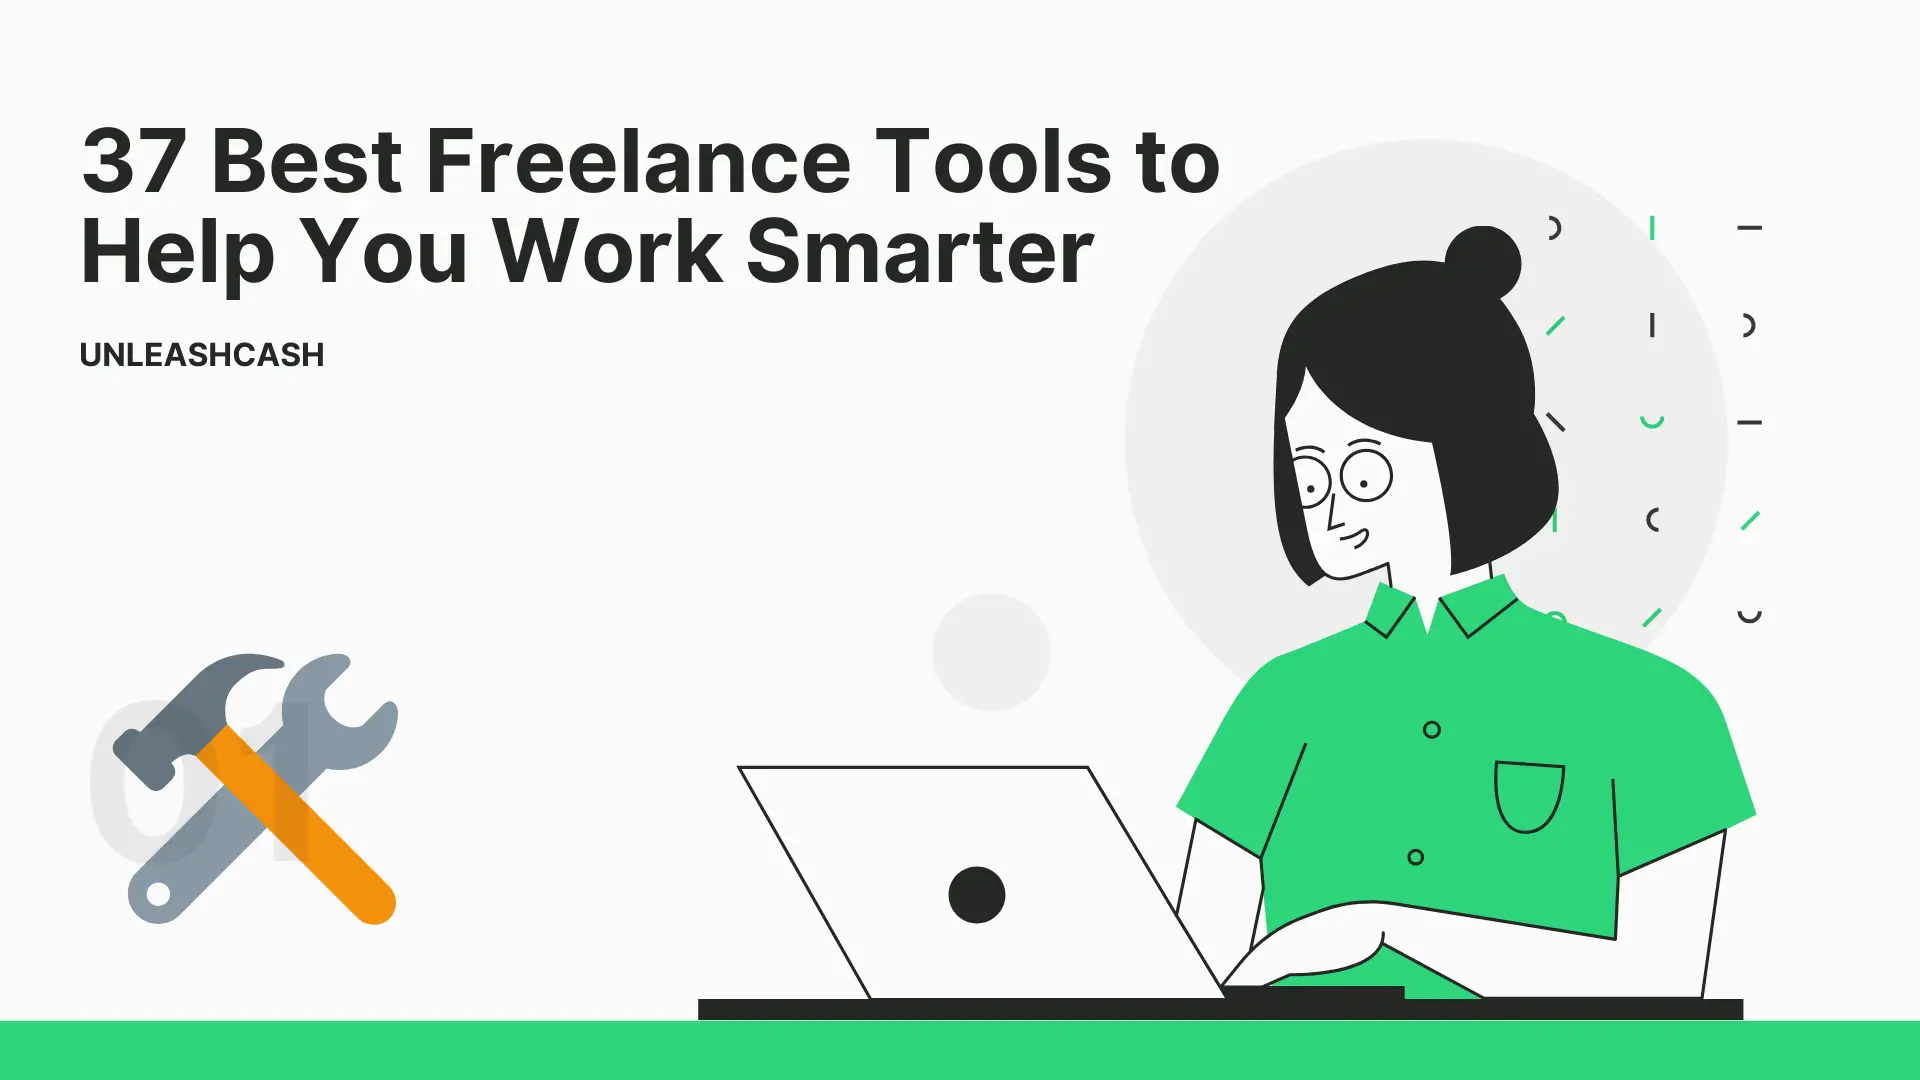 37 Best Freelance Tools to Help You Work Smarter